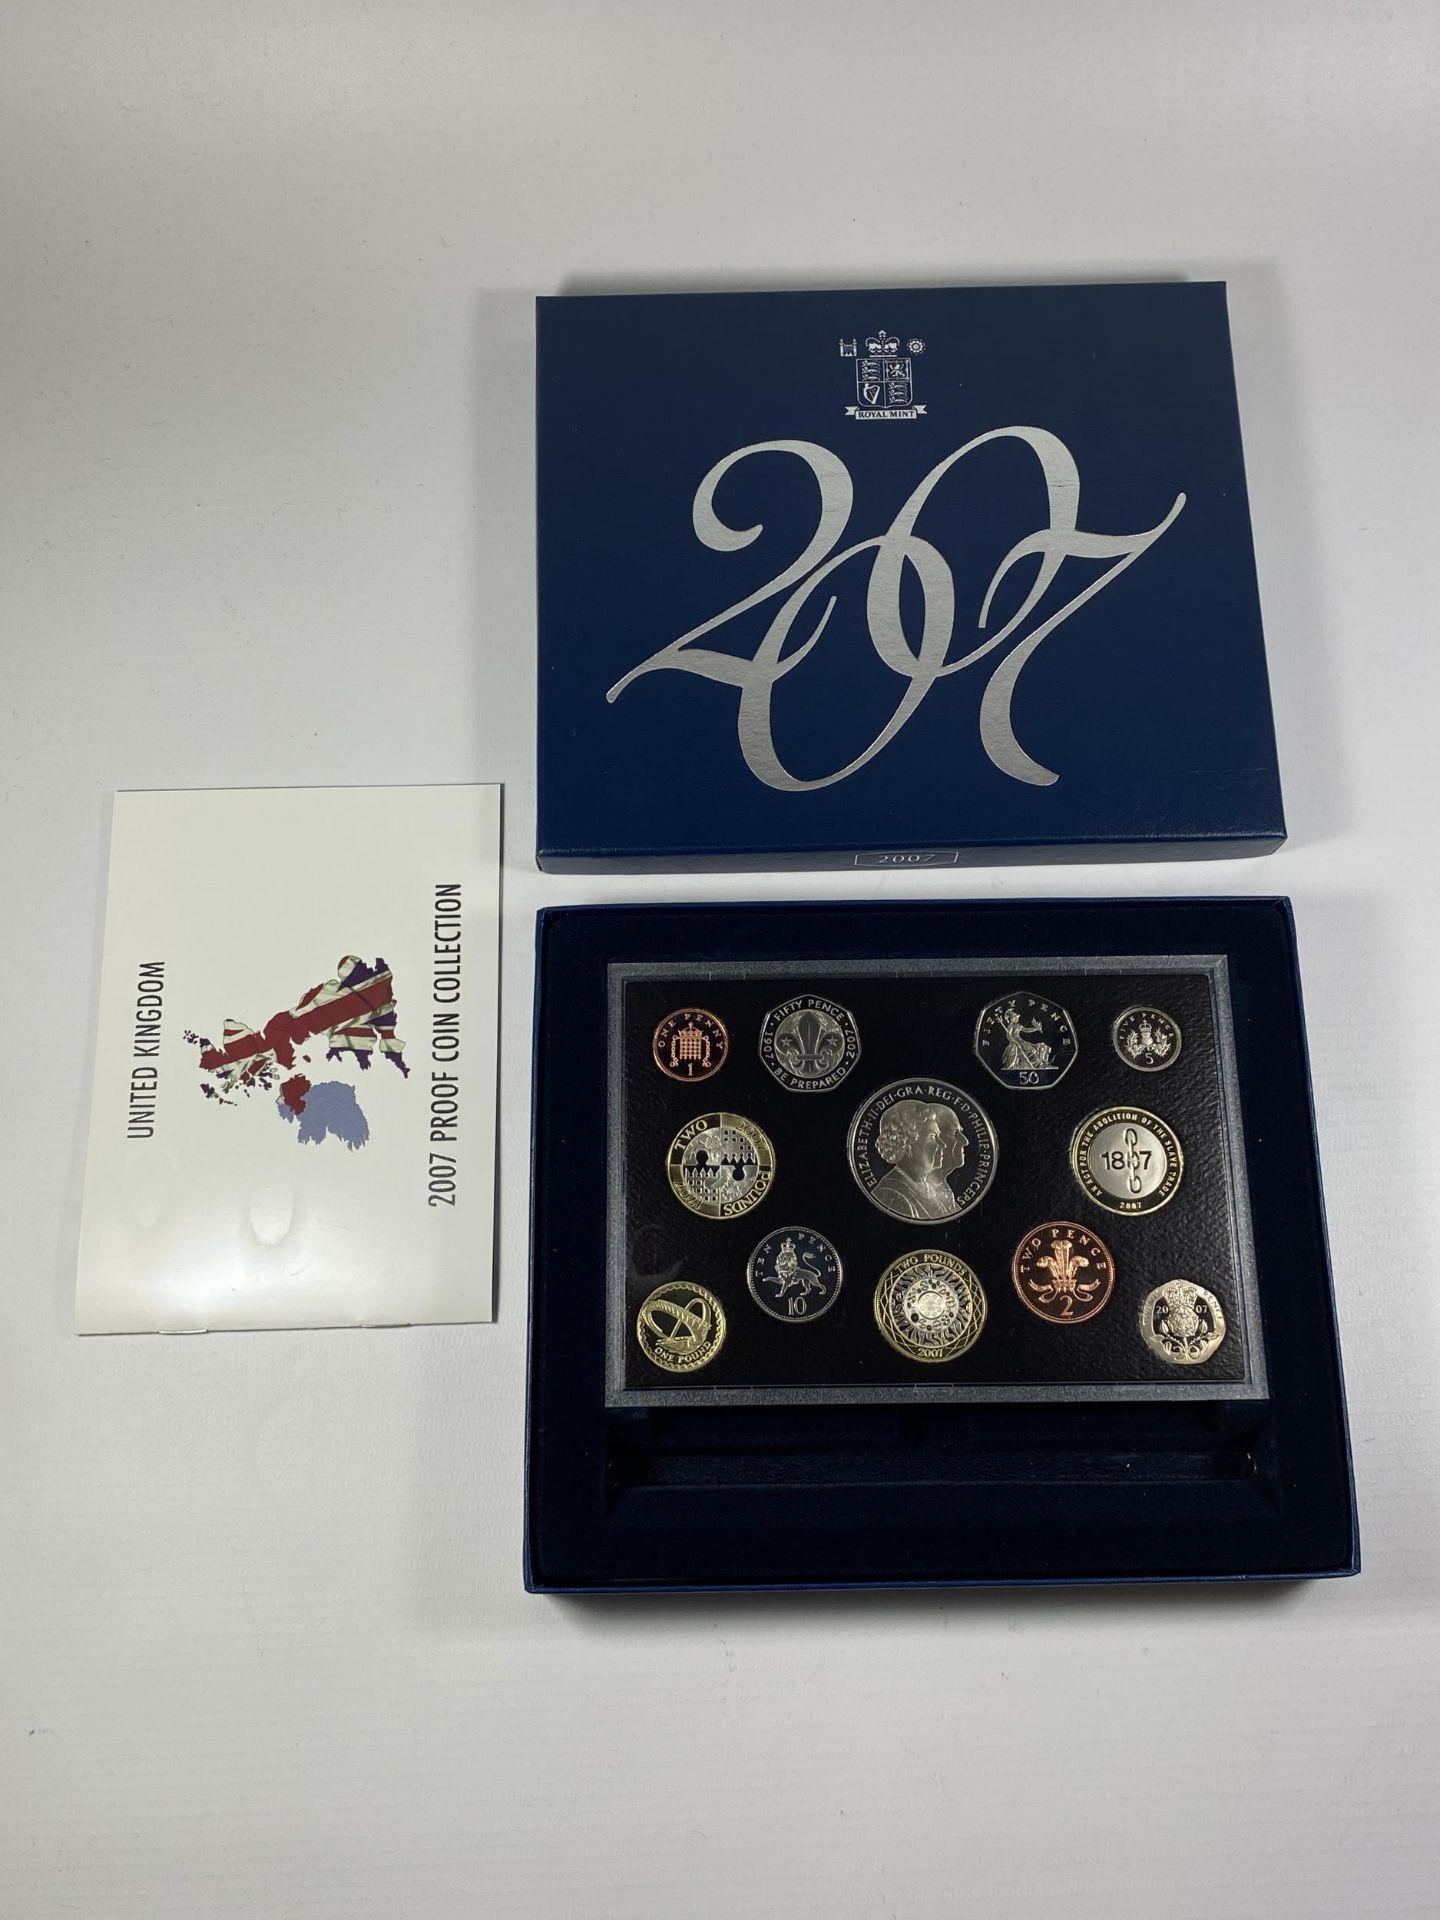 A 2007 ROYAL MINT CASED PROOF COIN SET